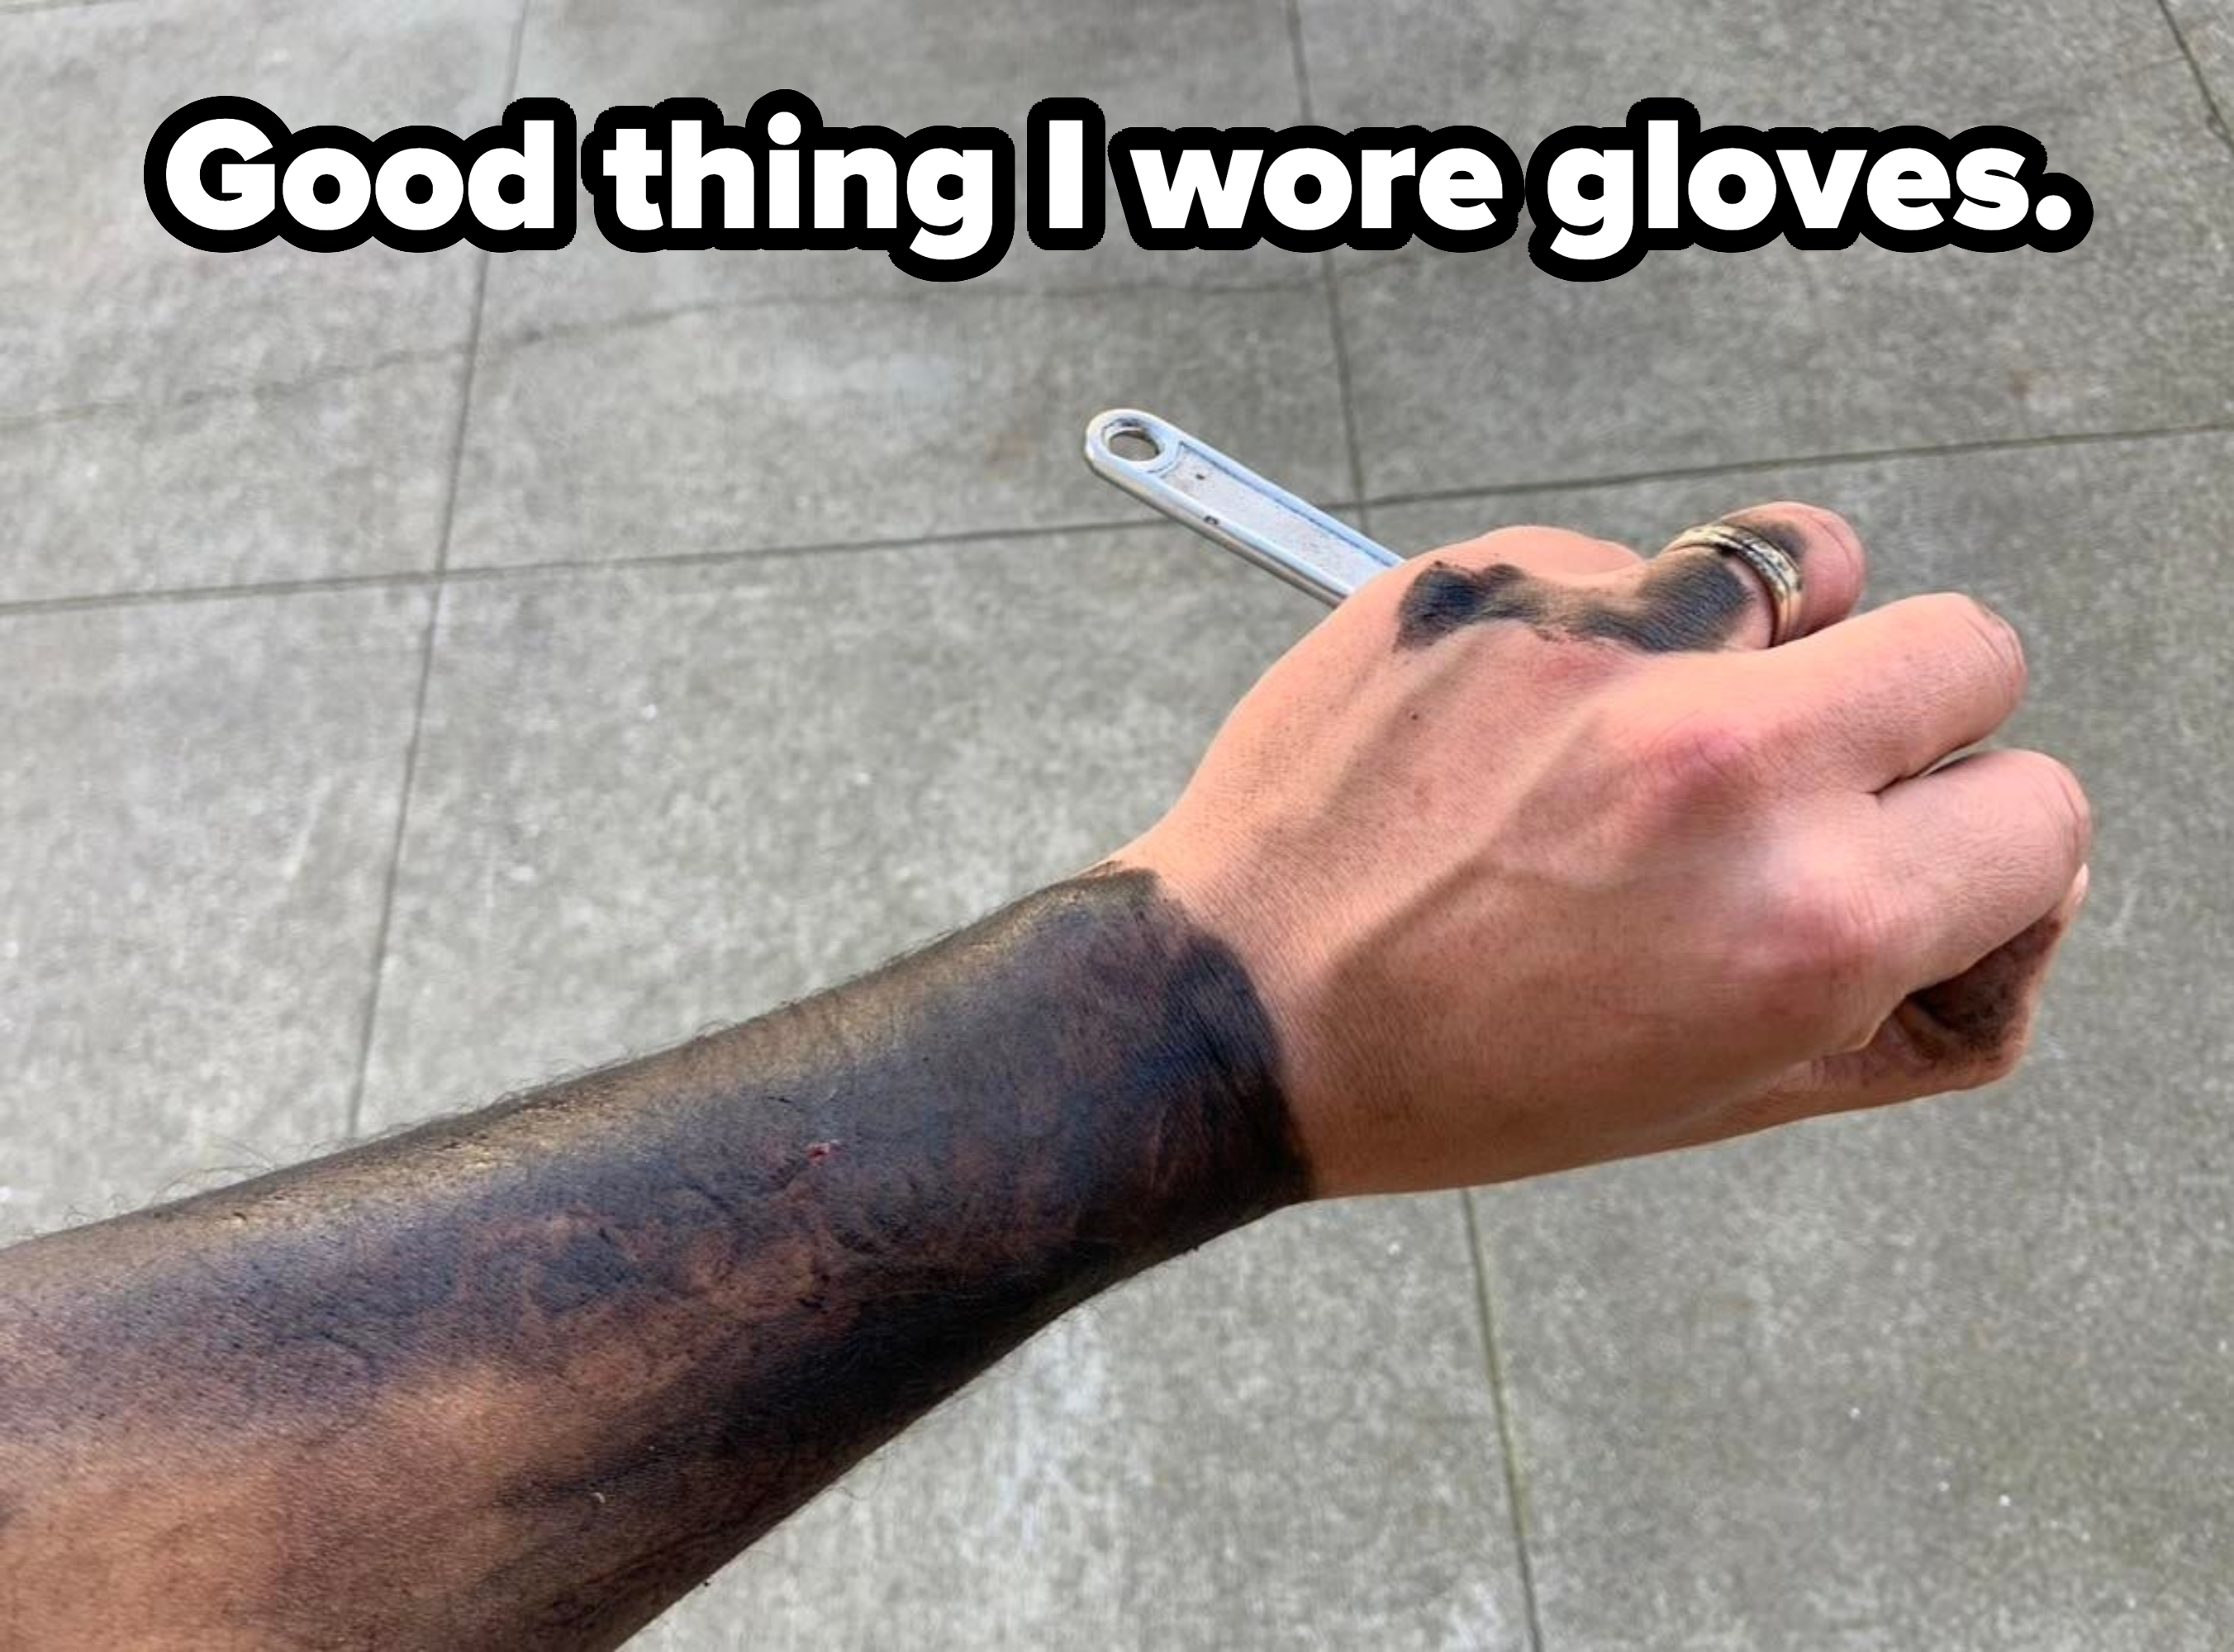 &quot;Good thing I wore gloves.&quot;